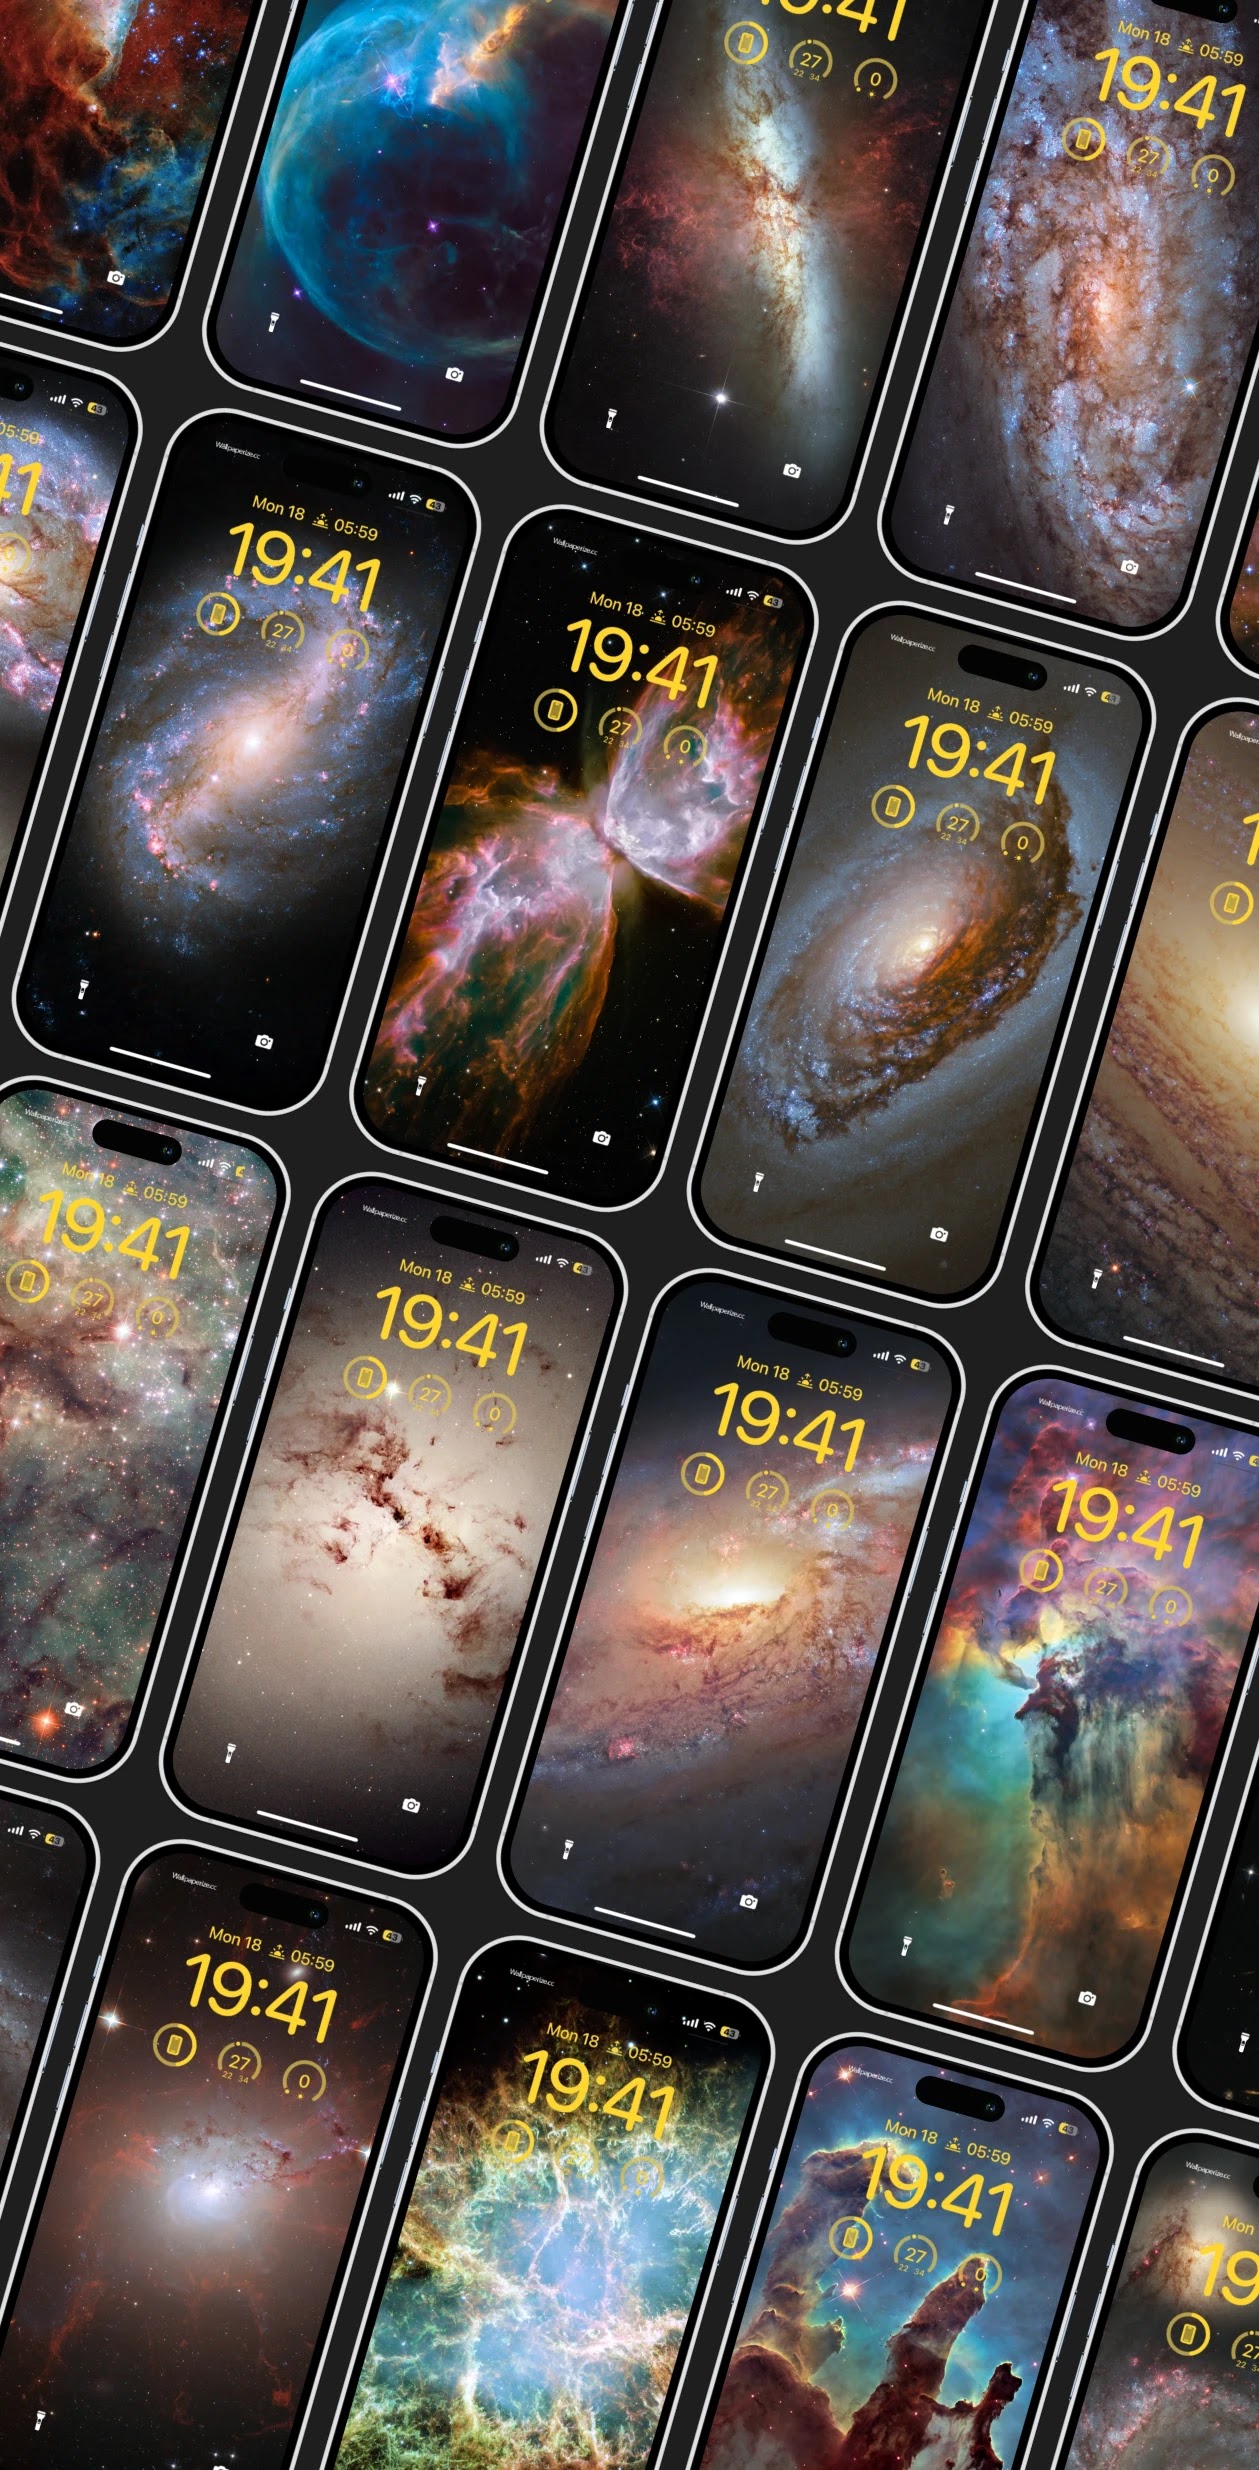 26 Breathtaking Space Wallpapers for Your Phone!